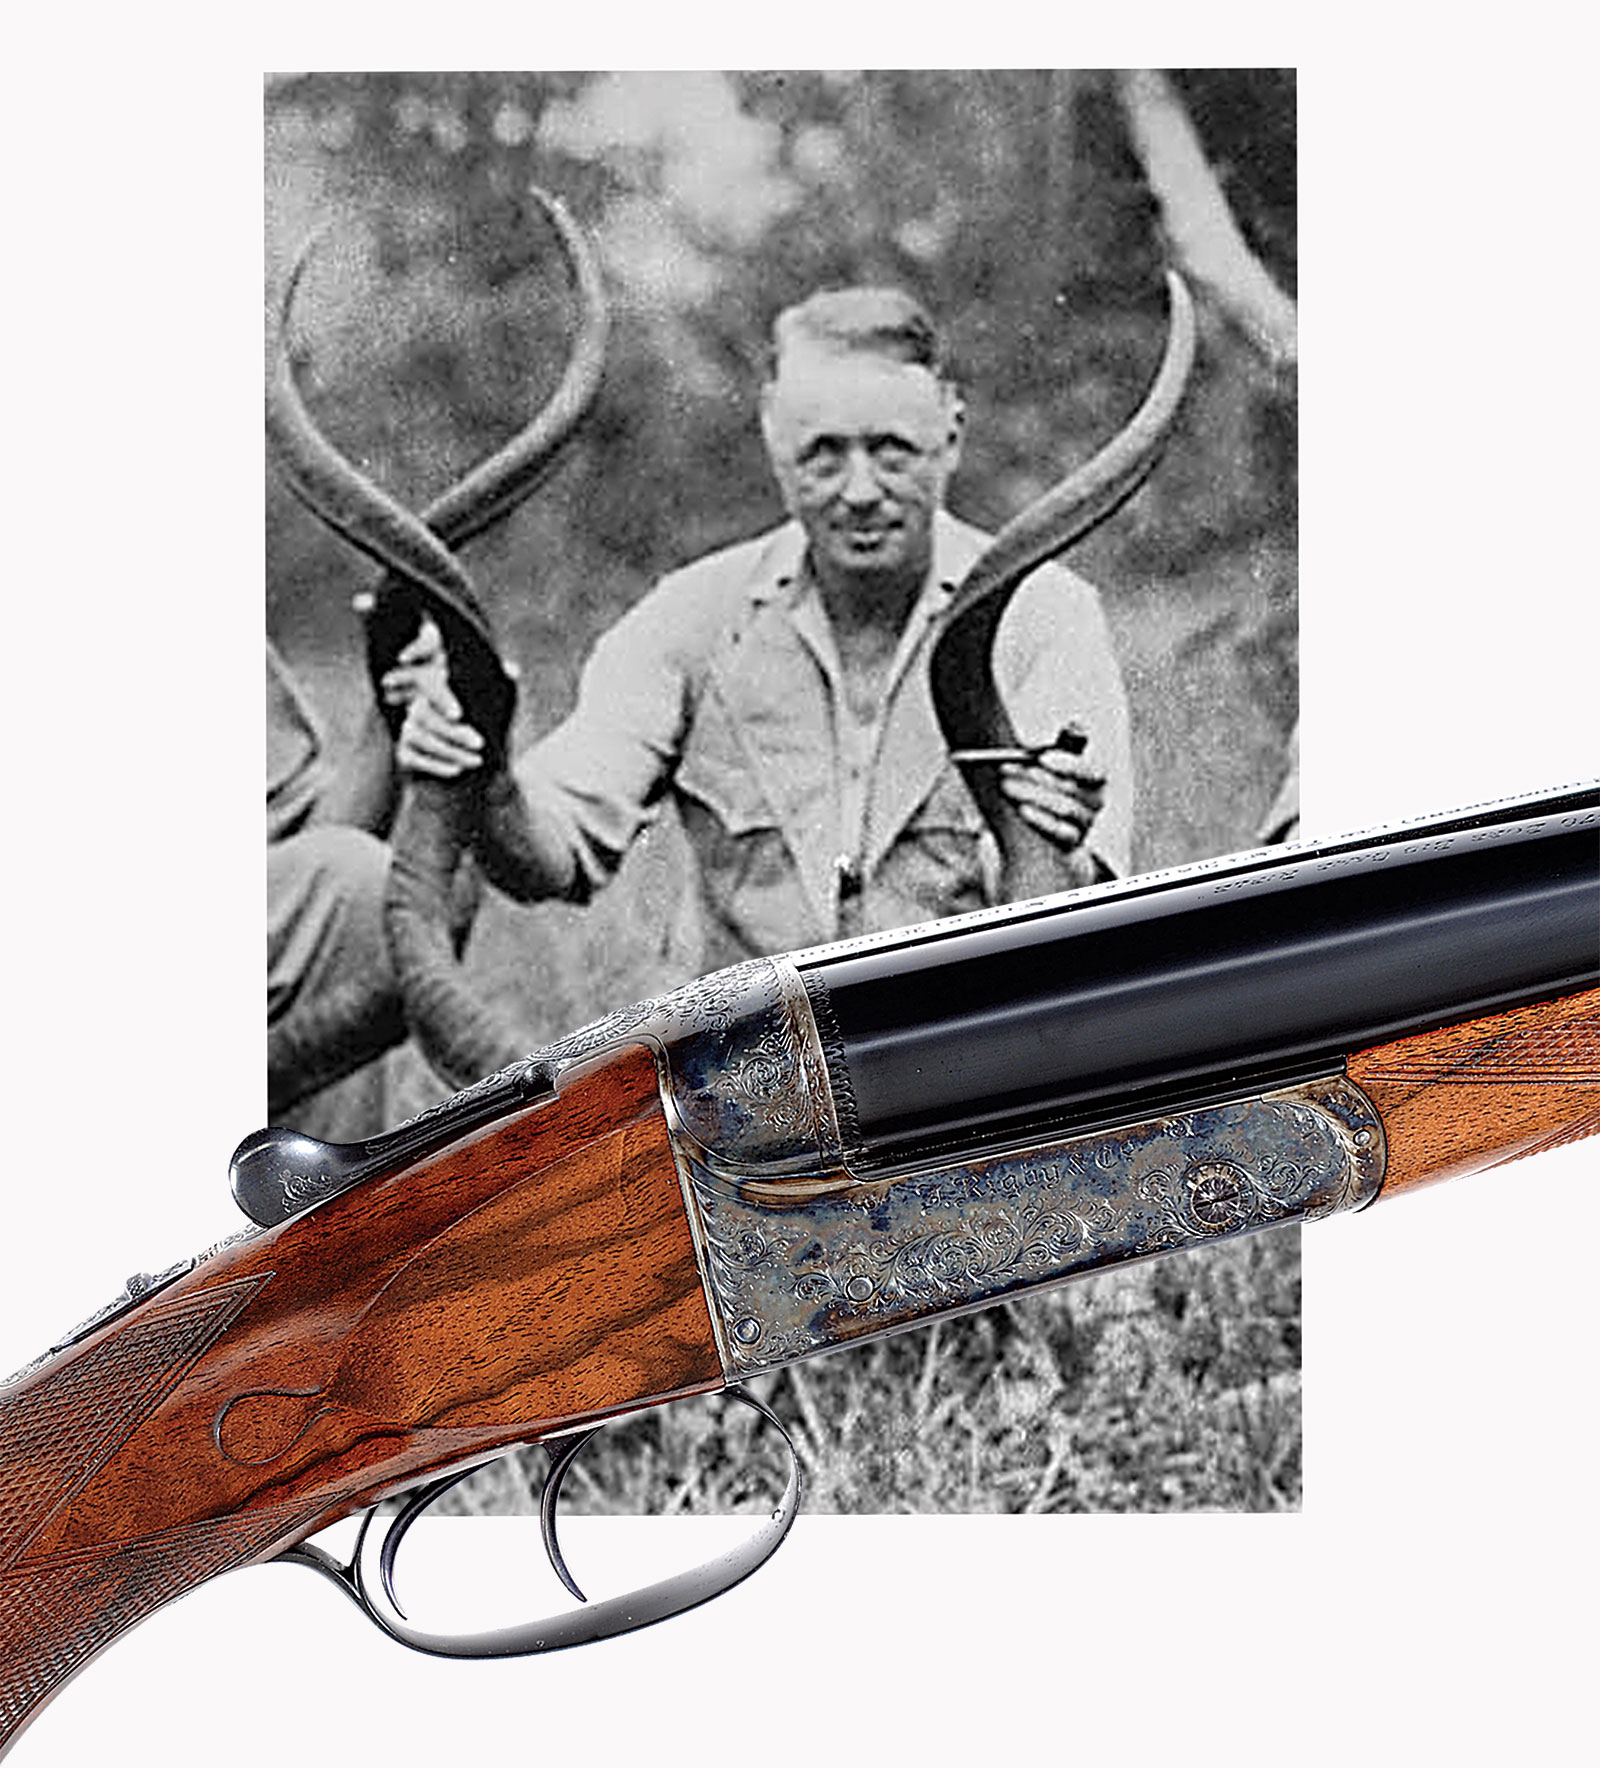 John Rigby cal .470 Boxlock Ejector Double Rifle owned by Philip H. Percival, the “Dean of African Professional Hunters” who inspired Hemingway’s character “Pop” in “Green Hills of Africa."